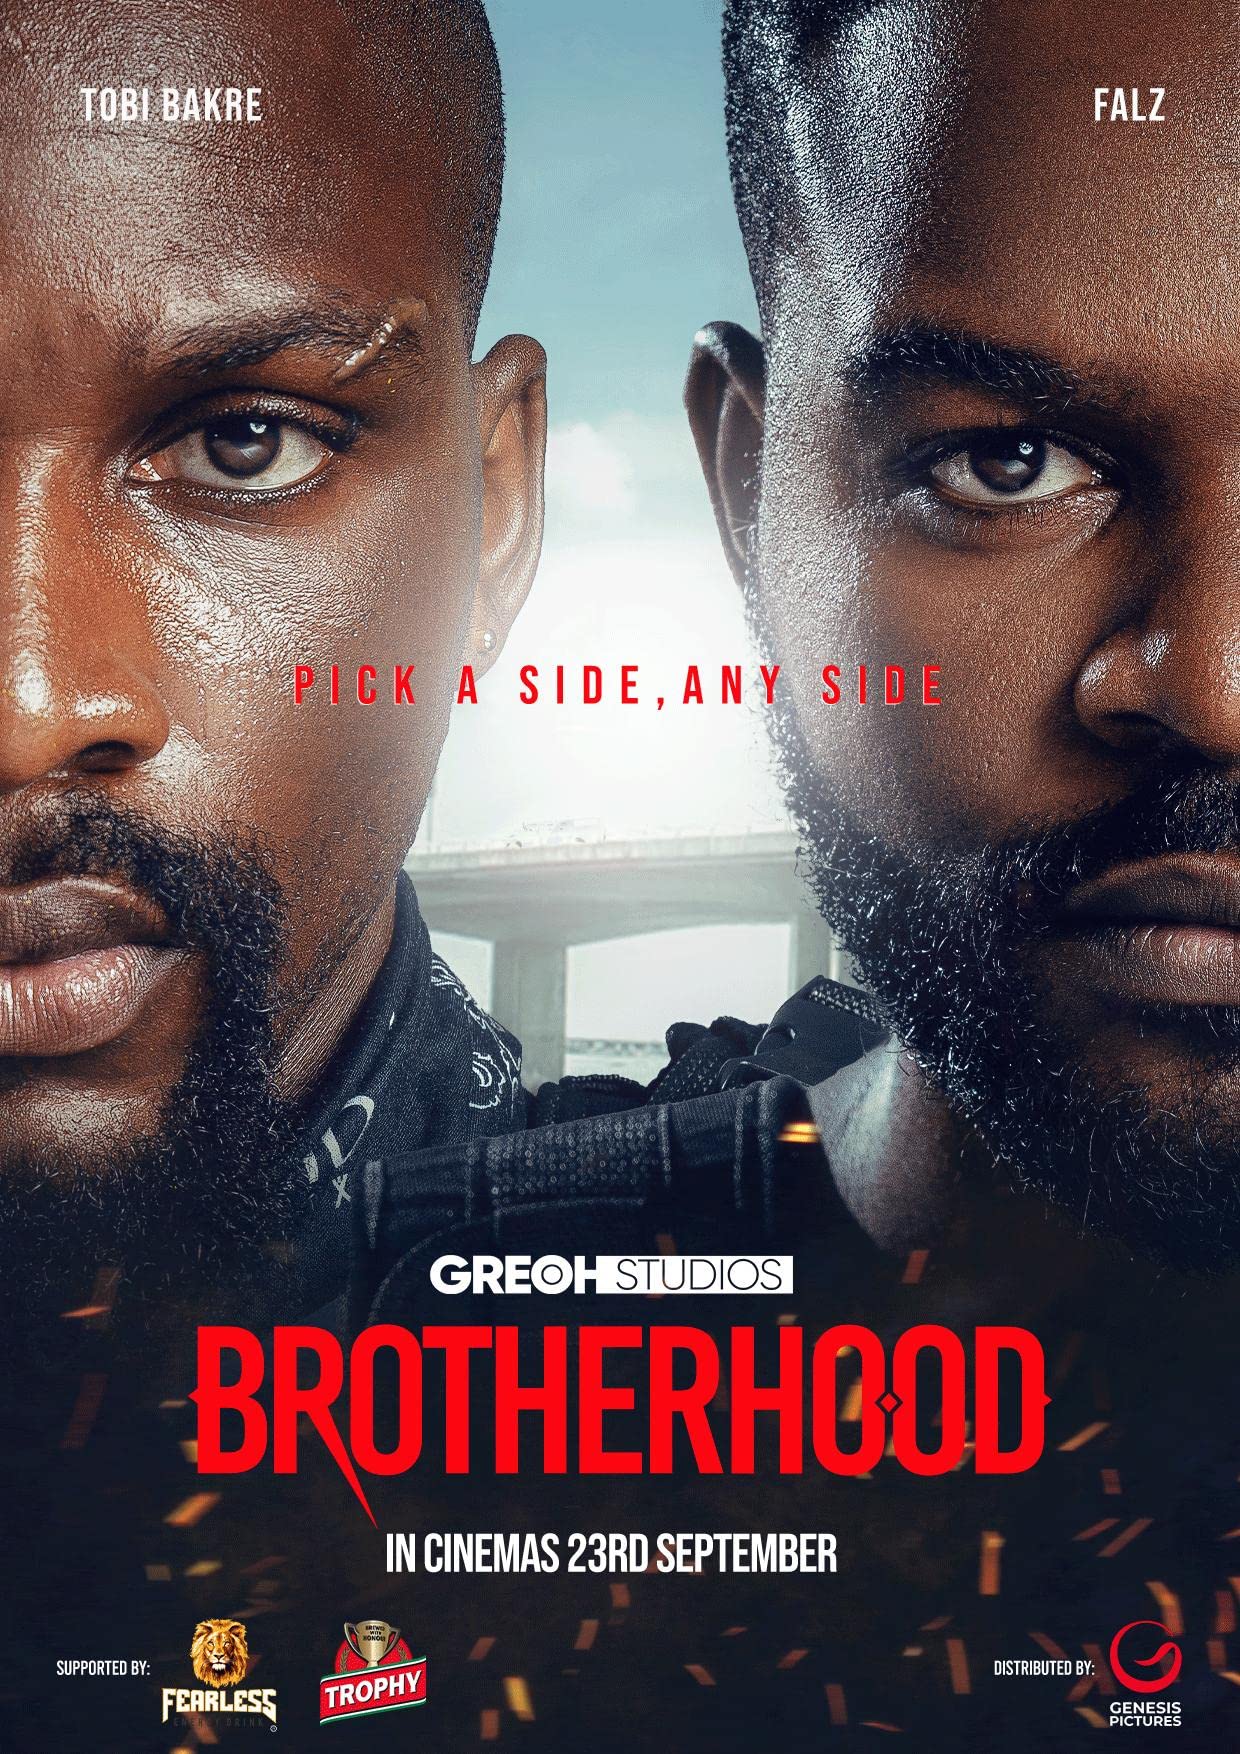 brotherhood poster - “The Woman King” conquers triple-decker sales in 7 days. Can “Brotherhood” do the same?